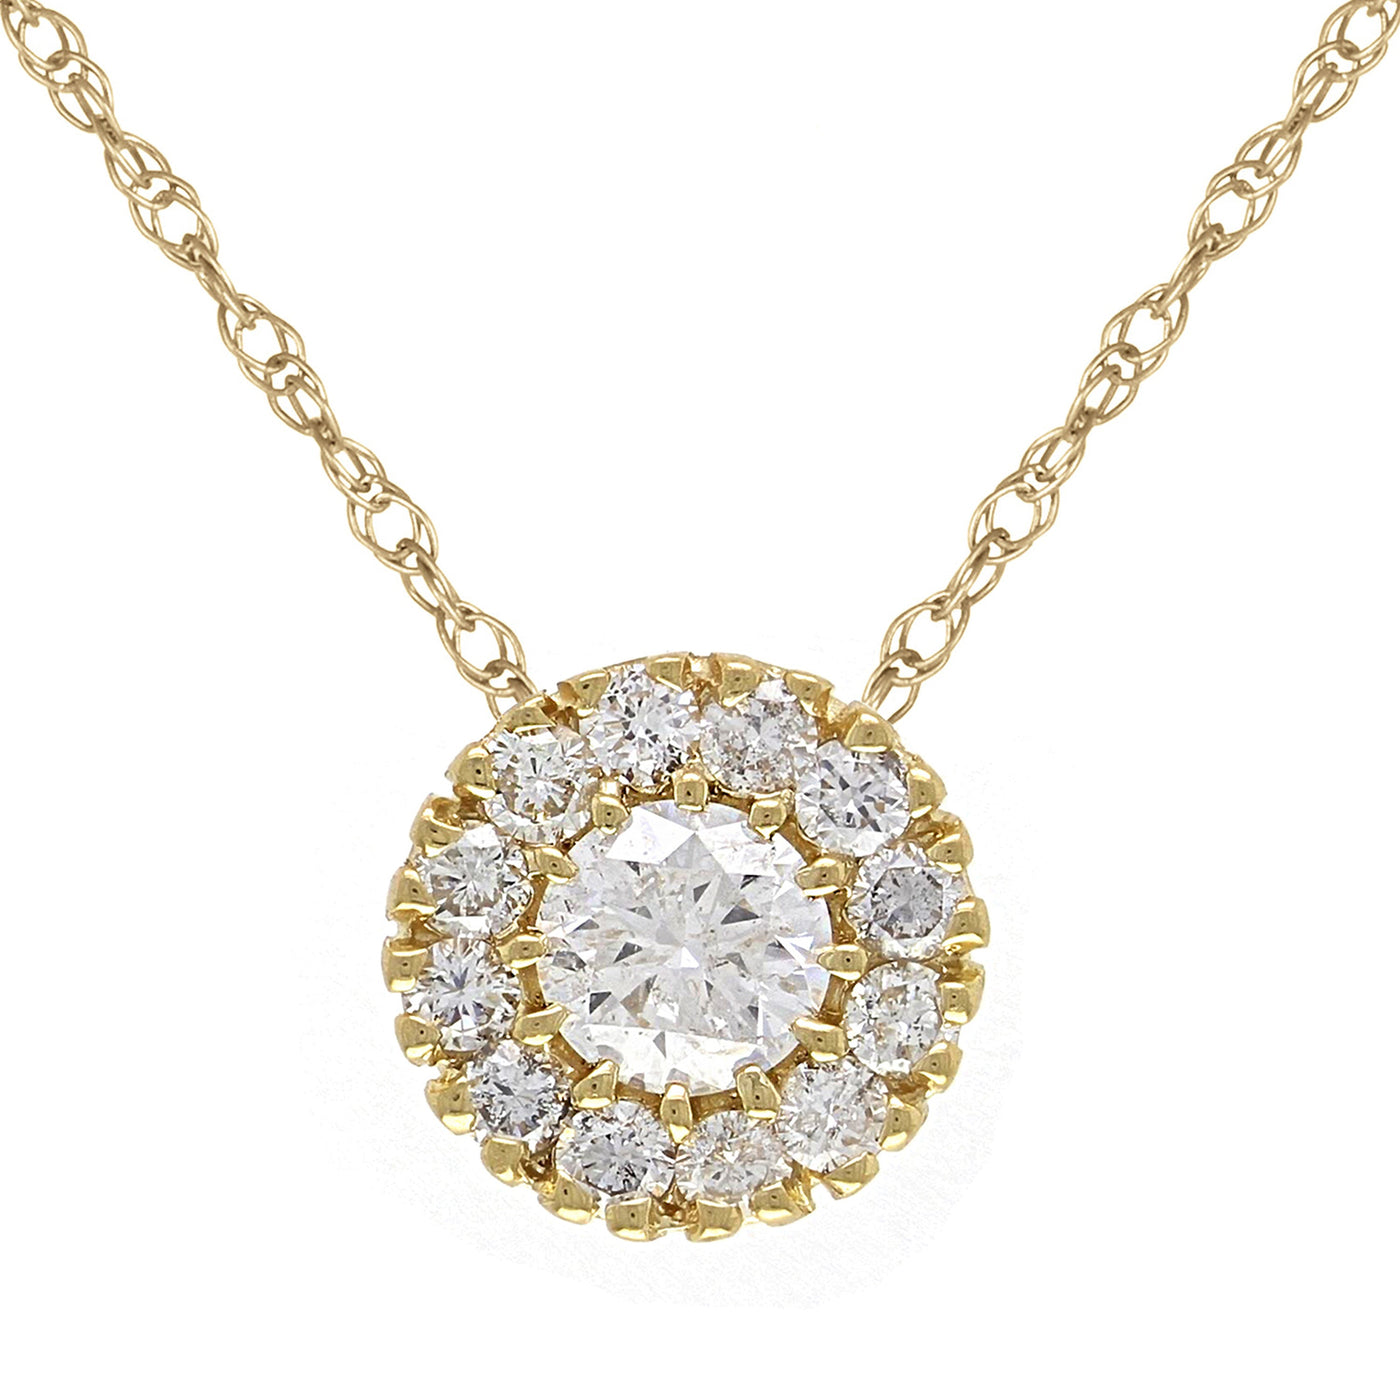 A close-up of a real gold diamond necklace by Direct Source Gold & Diamond.